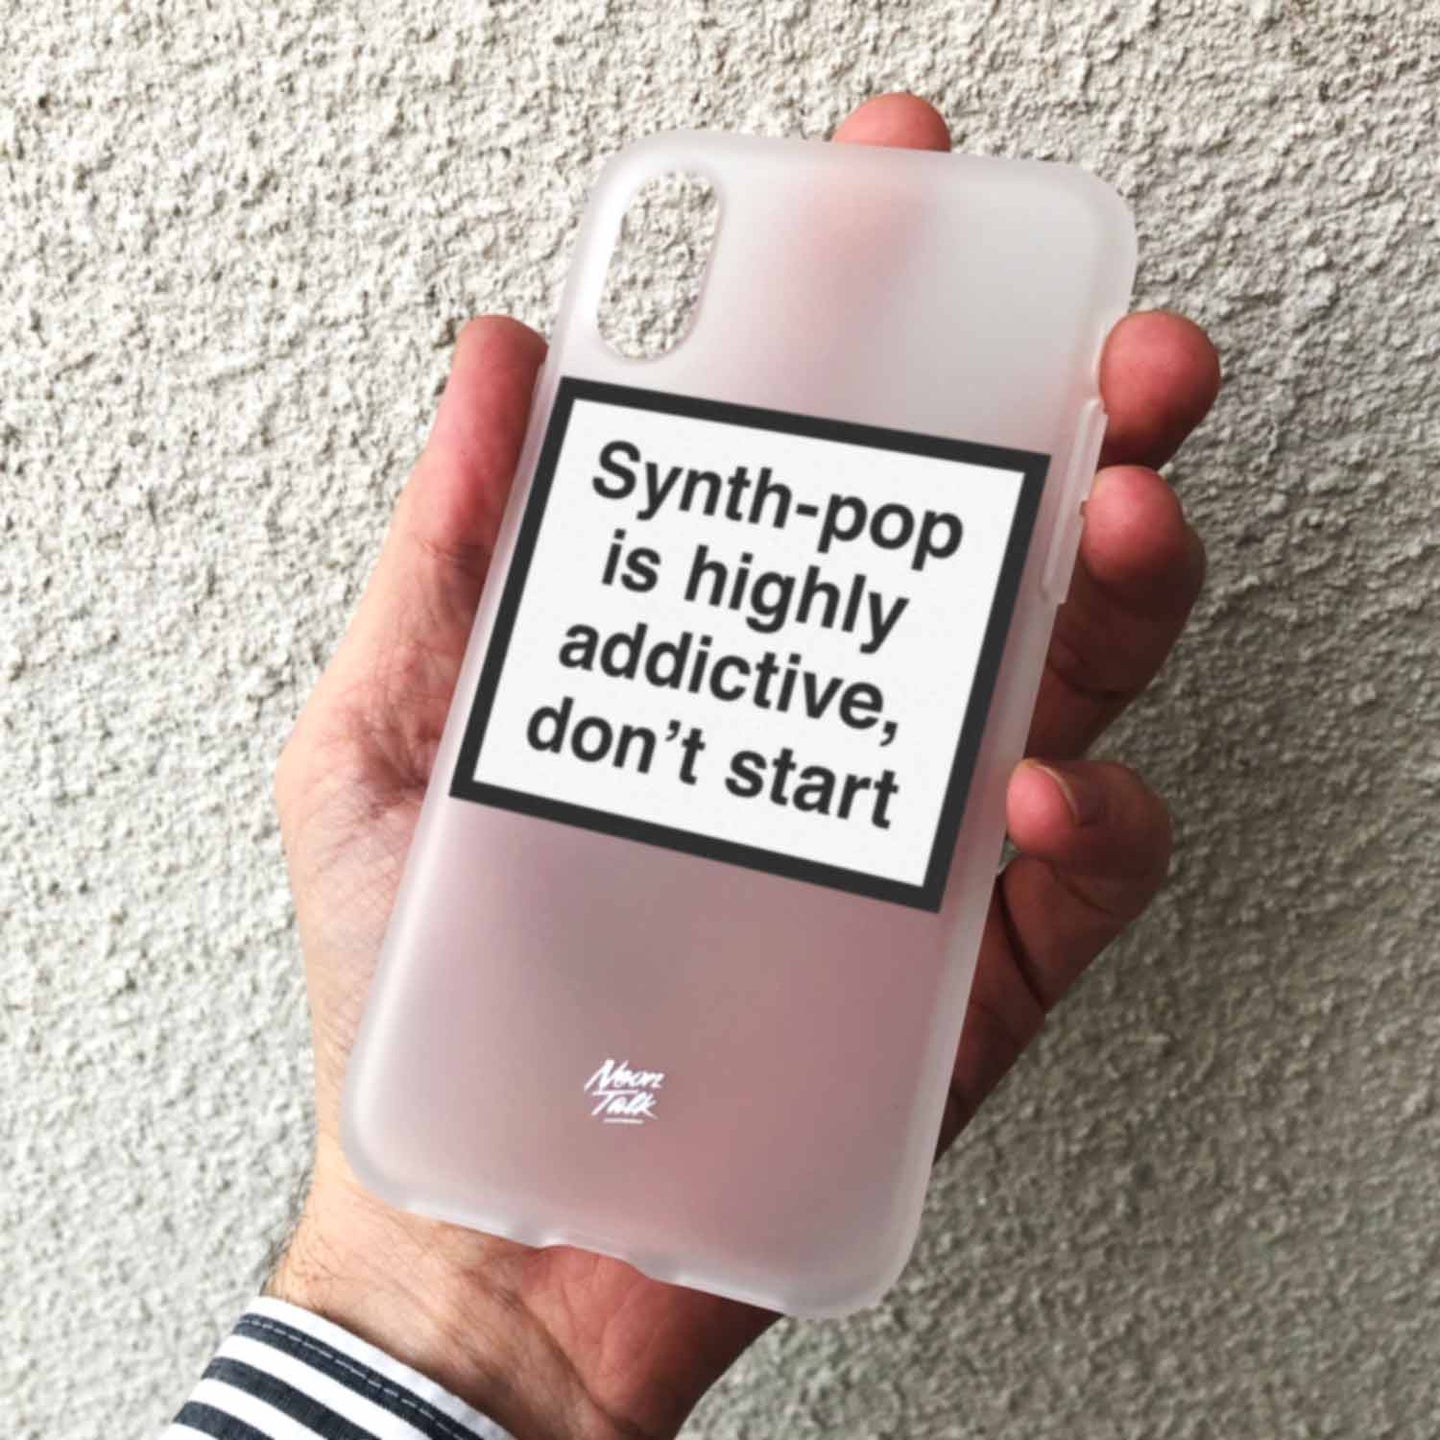 Synth-pop is Highly addictive, don't start. Metamessage Phone Case.